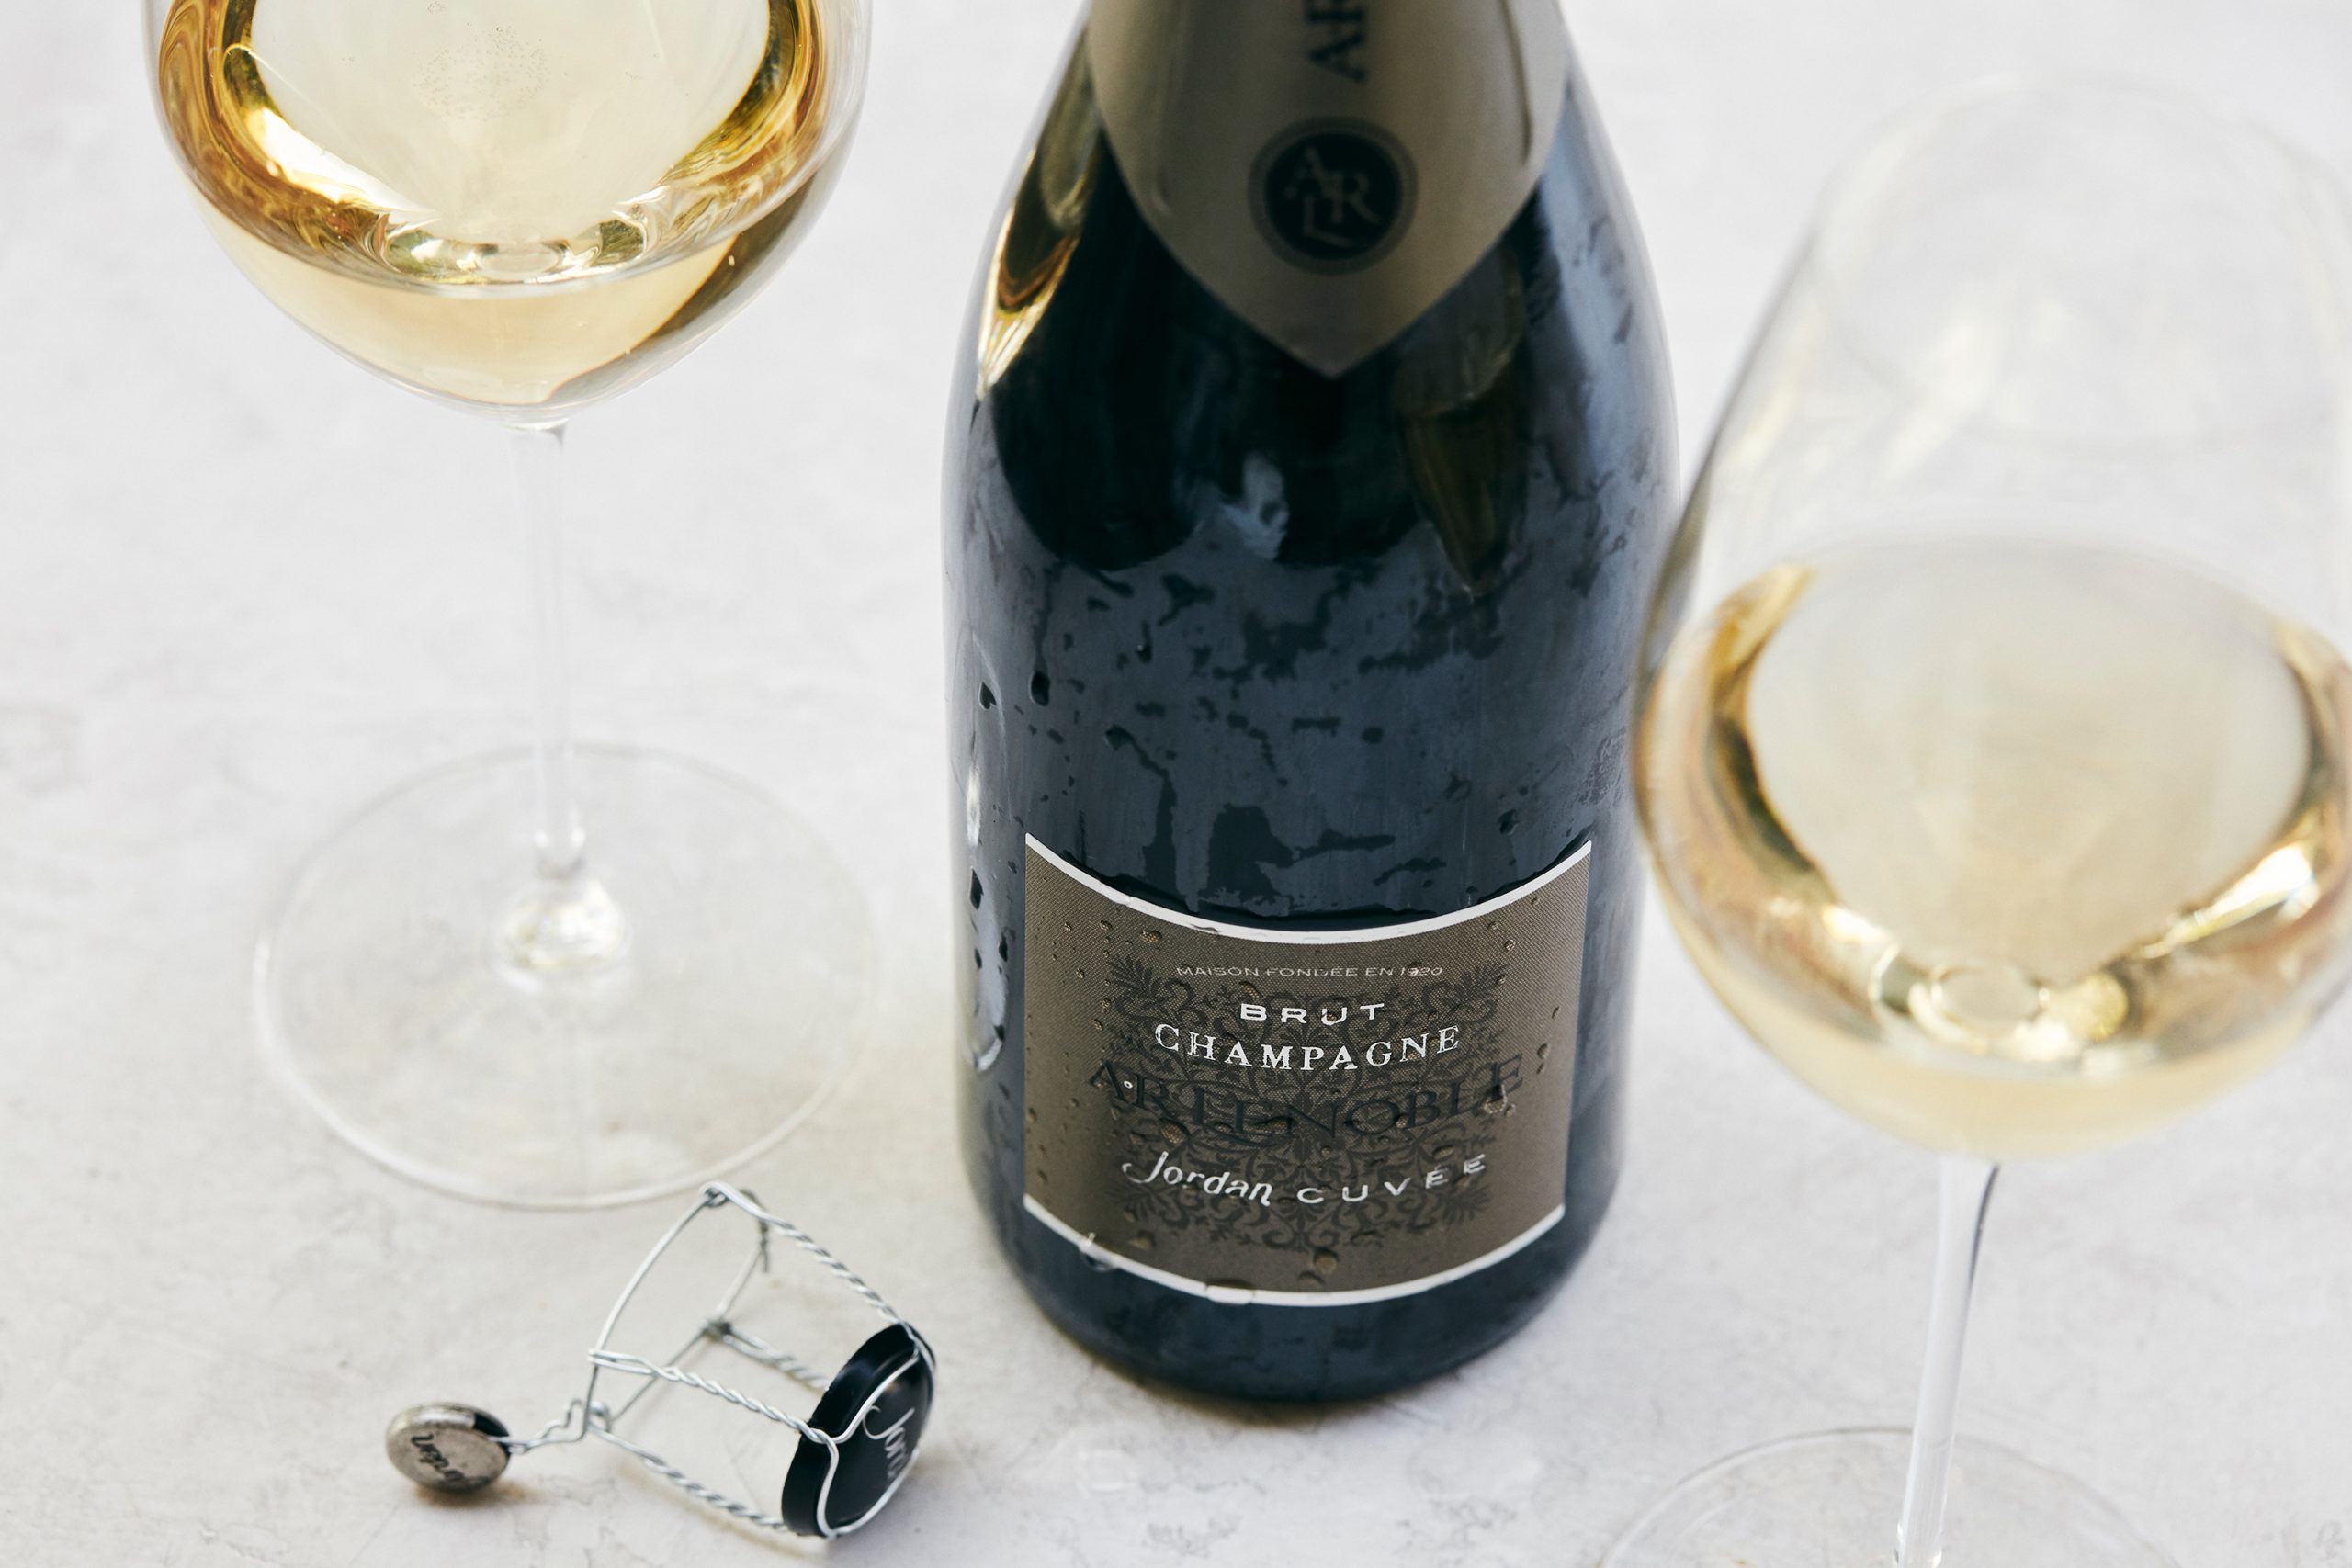 A bottle and glasses of Jordan Cuvee by Champagne AR Lenoble